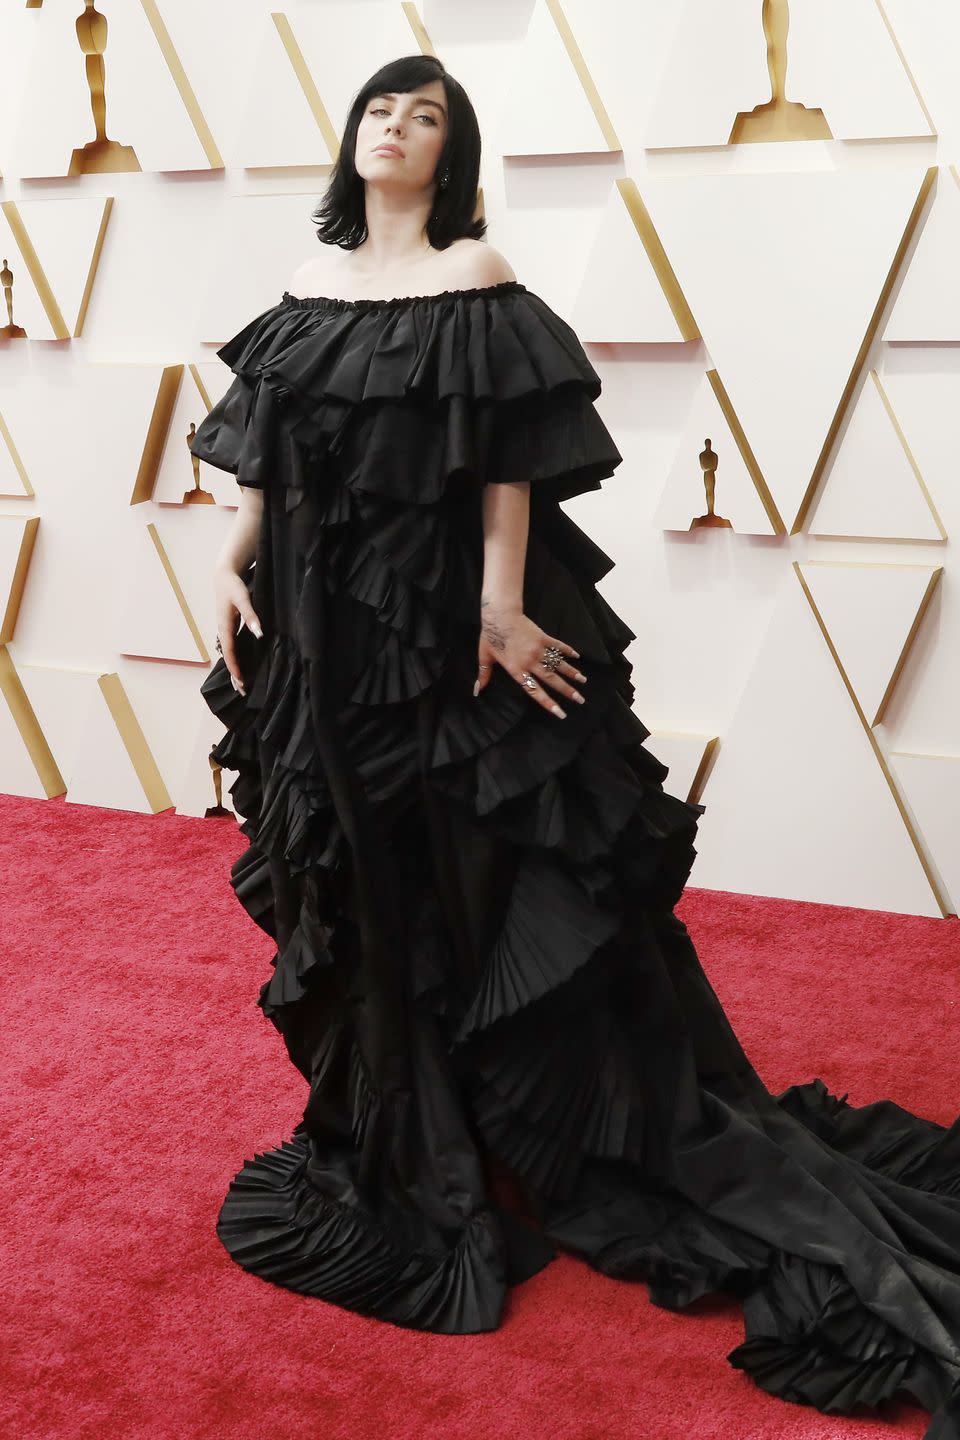 2022 billie eilish arrives on the red carpet outside the dolby theater for the 94th academy awards in los angeles